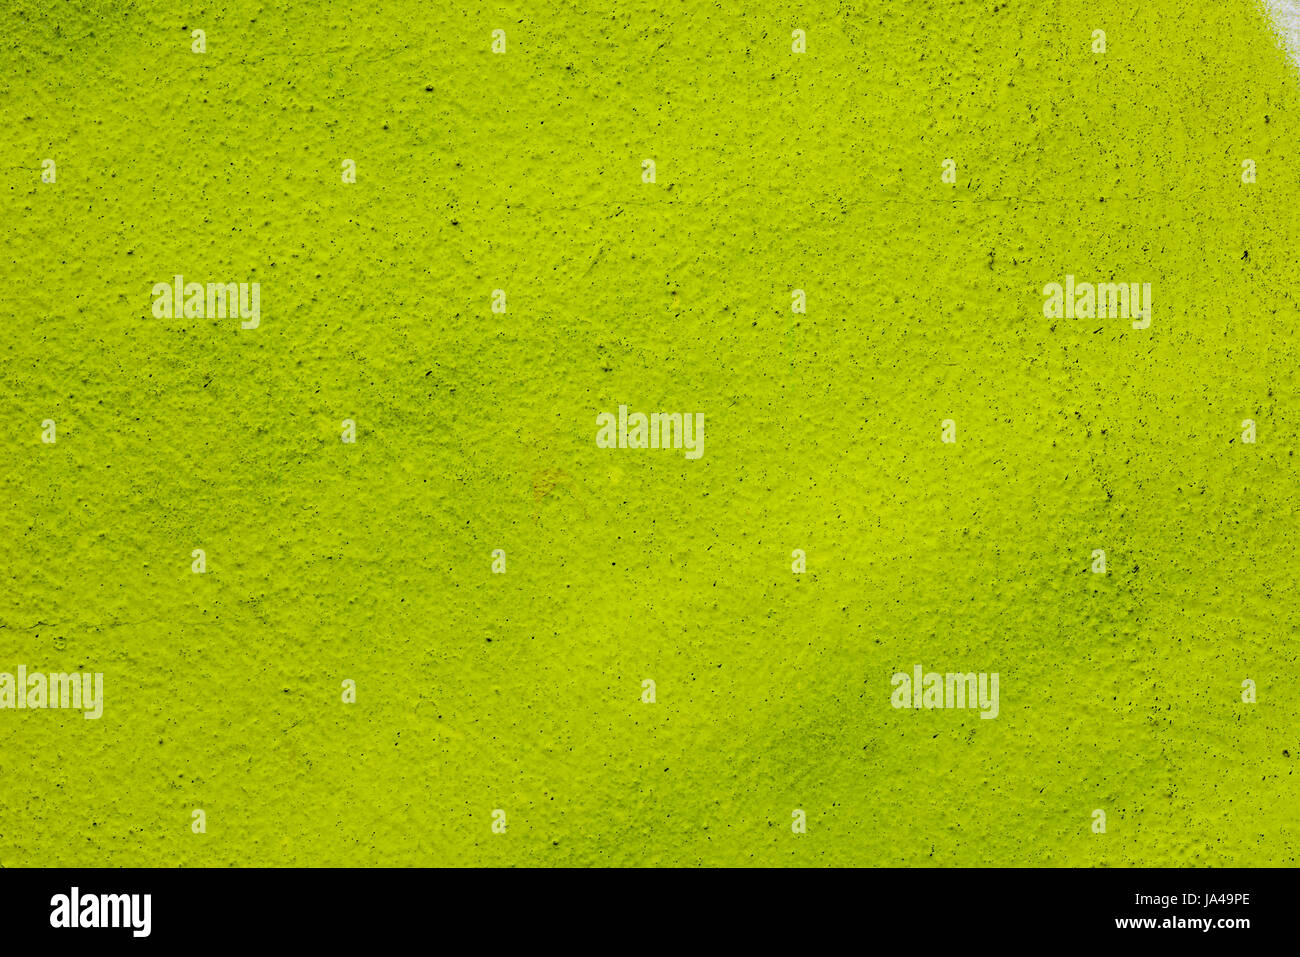 yellow color painted wall background texture Stock Photo